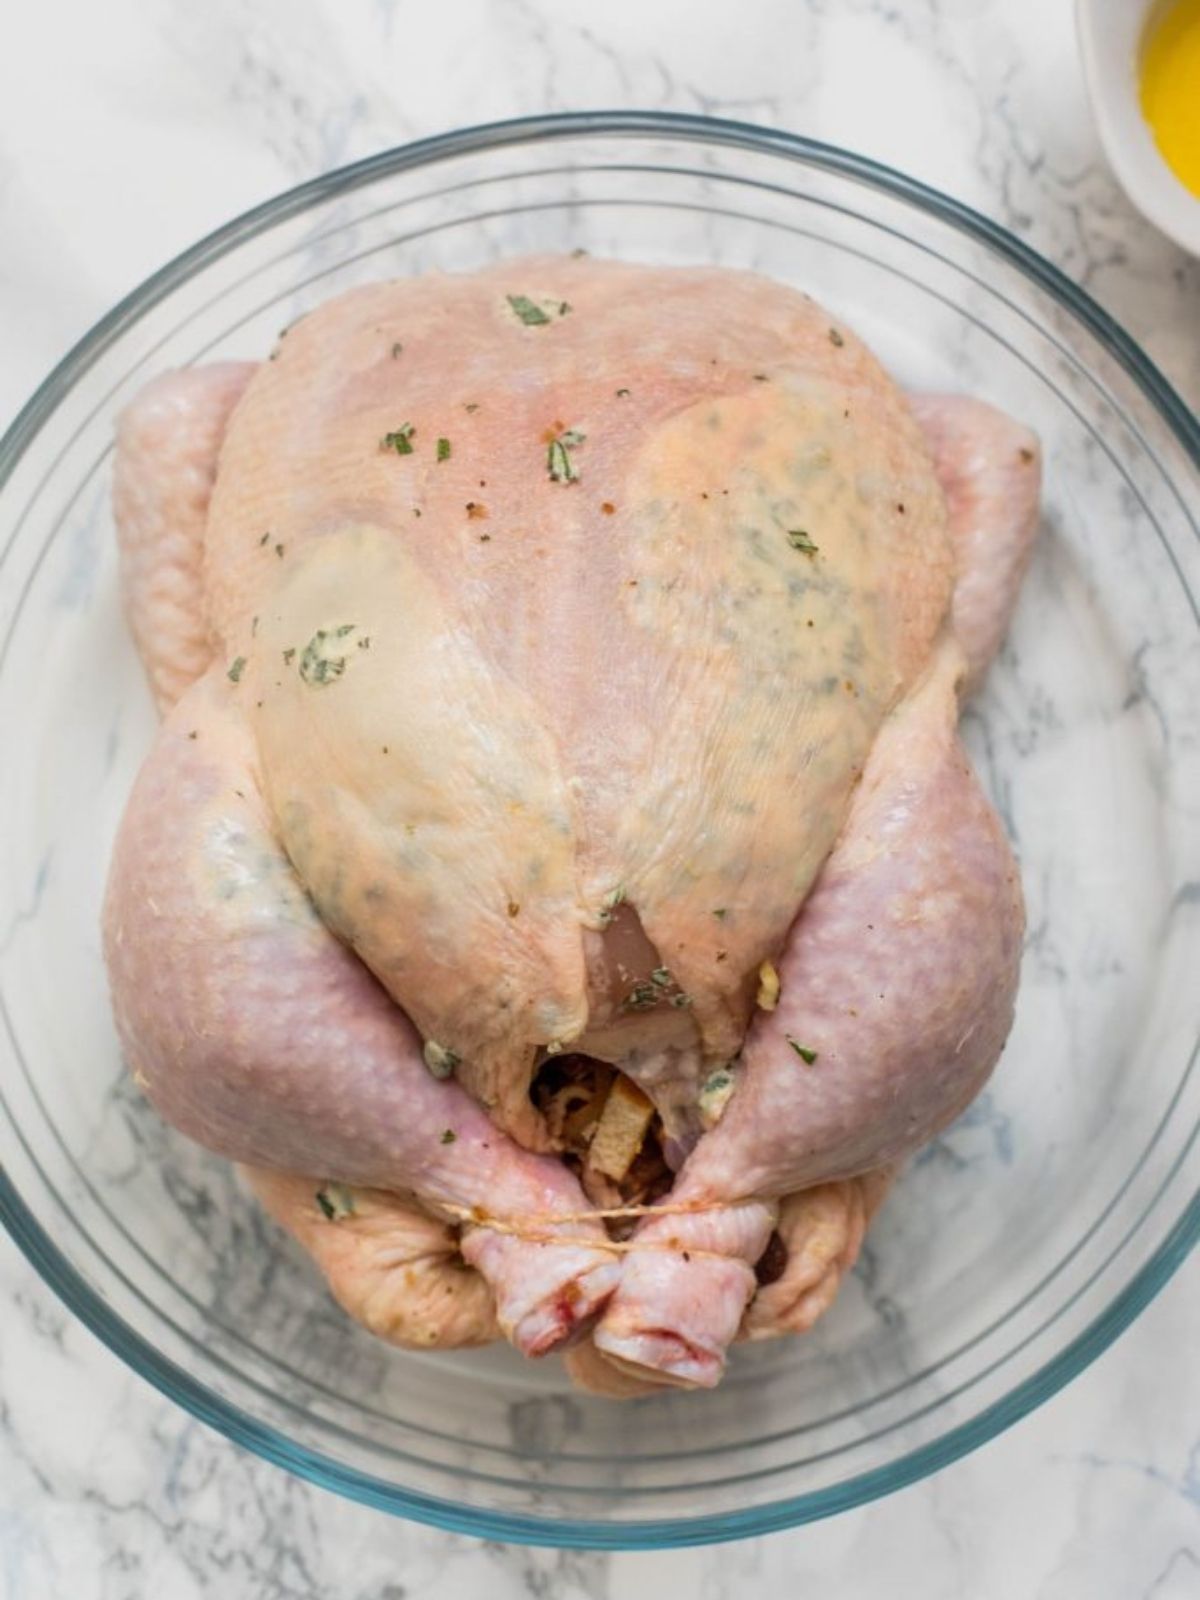 Preparing a Roast Chicken with Herbs and Spices 